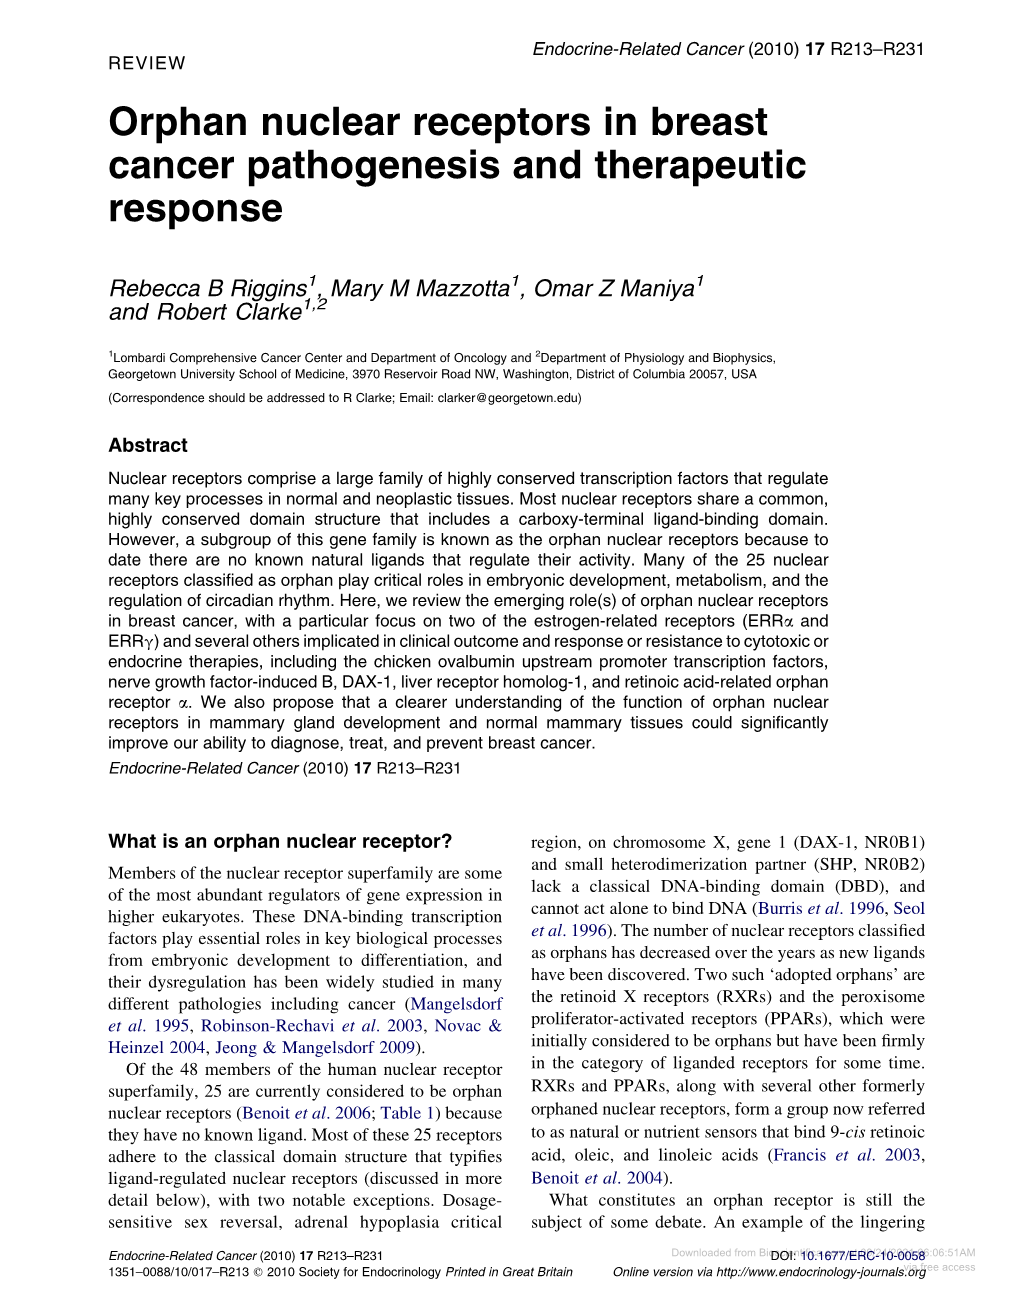 Orphan Nuclear Receptors in Breast Cancer Pathogenesis and Therapeutic Response